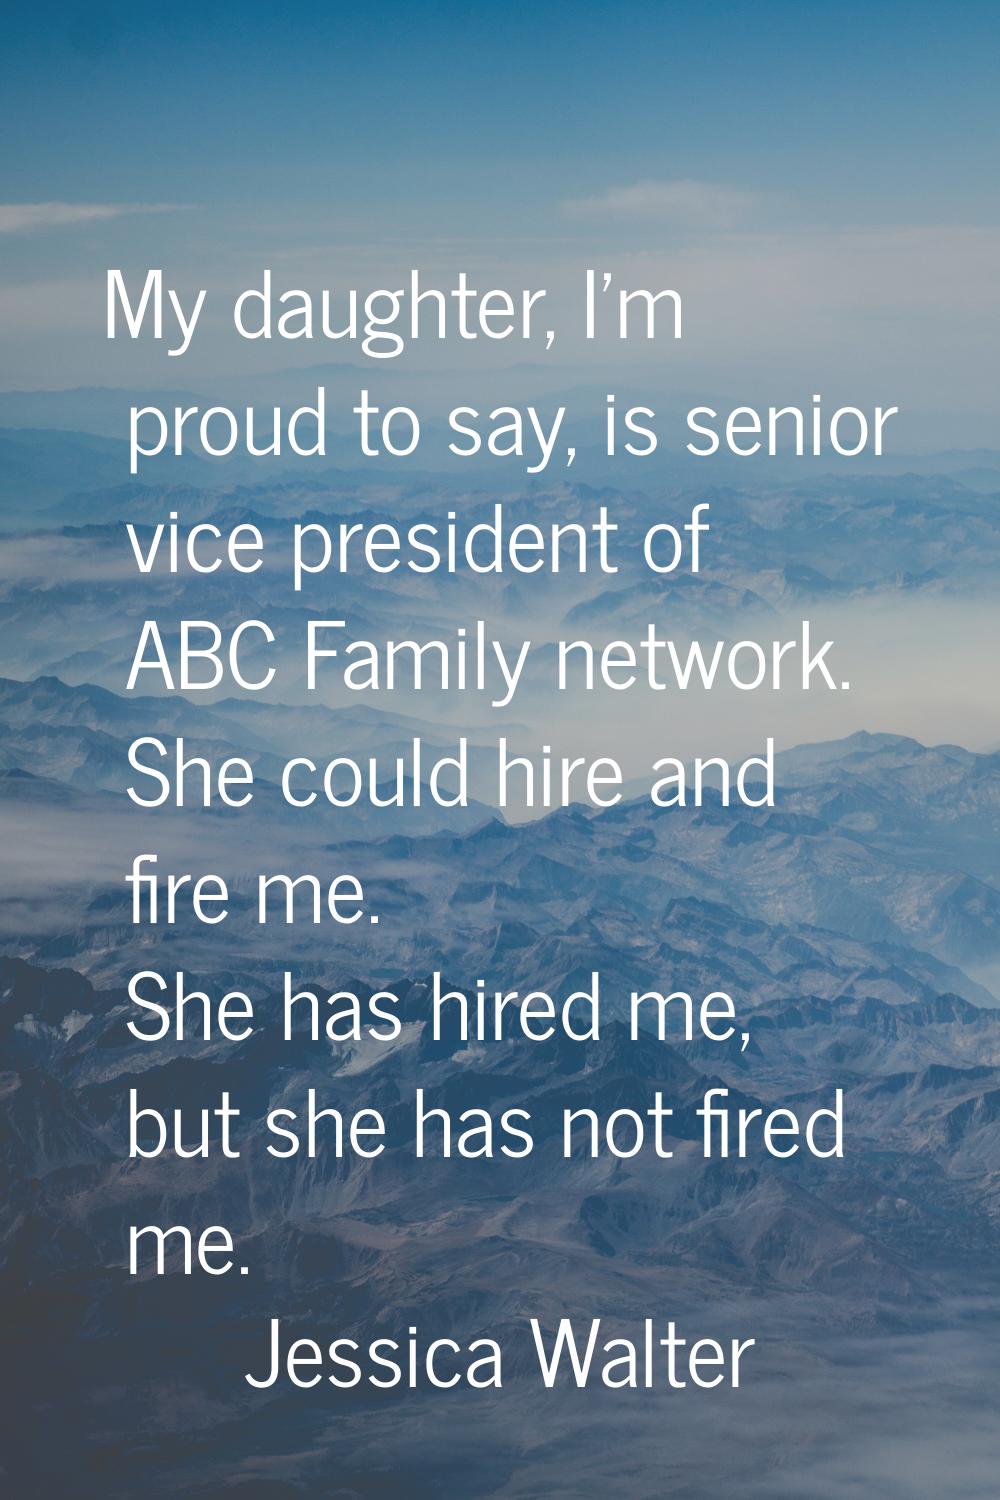 My daughter, I'm proud to say, is senior vice president of ABC Family network. She could hire and f